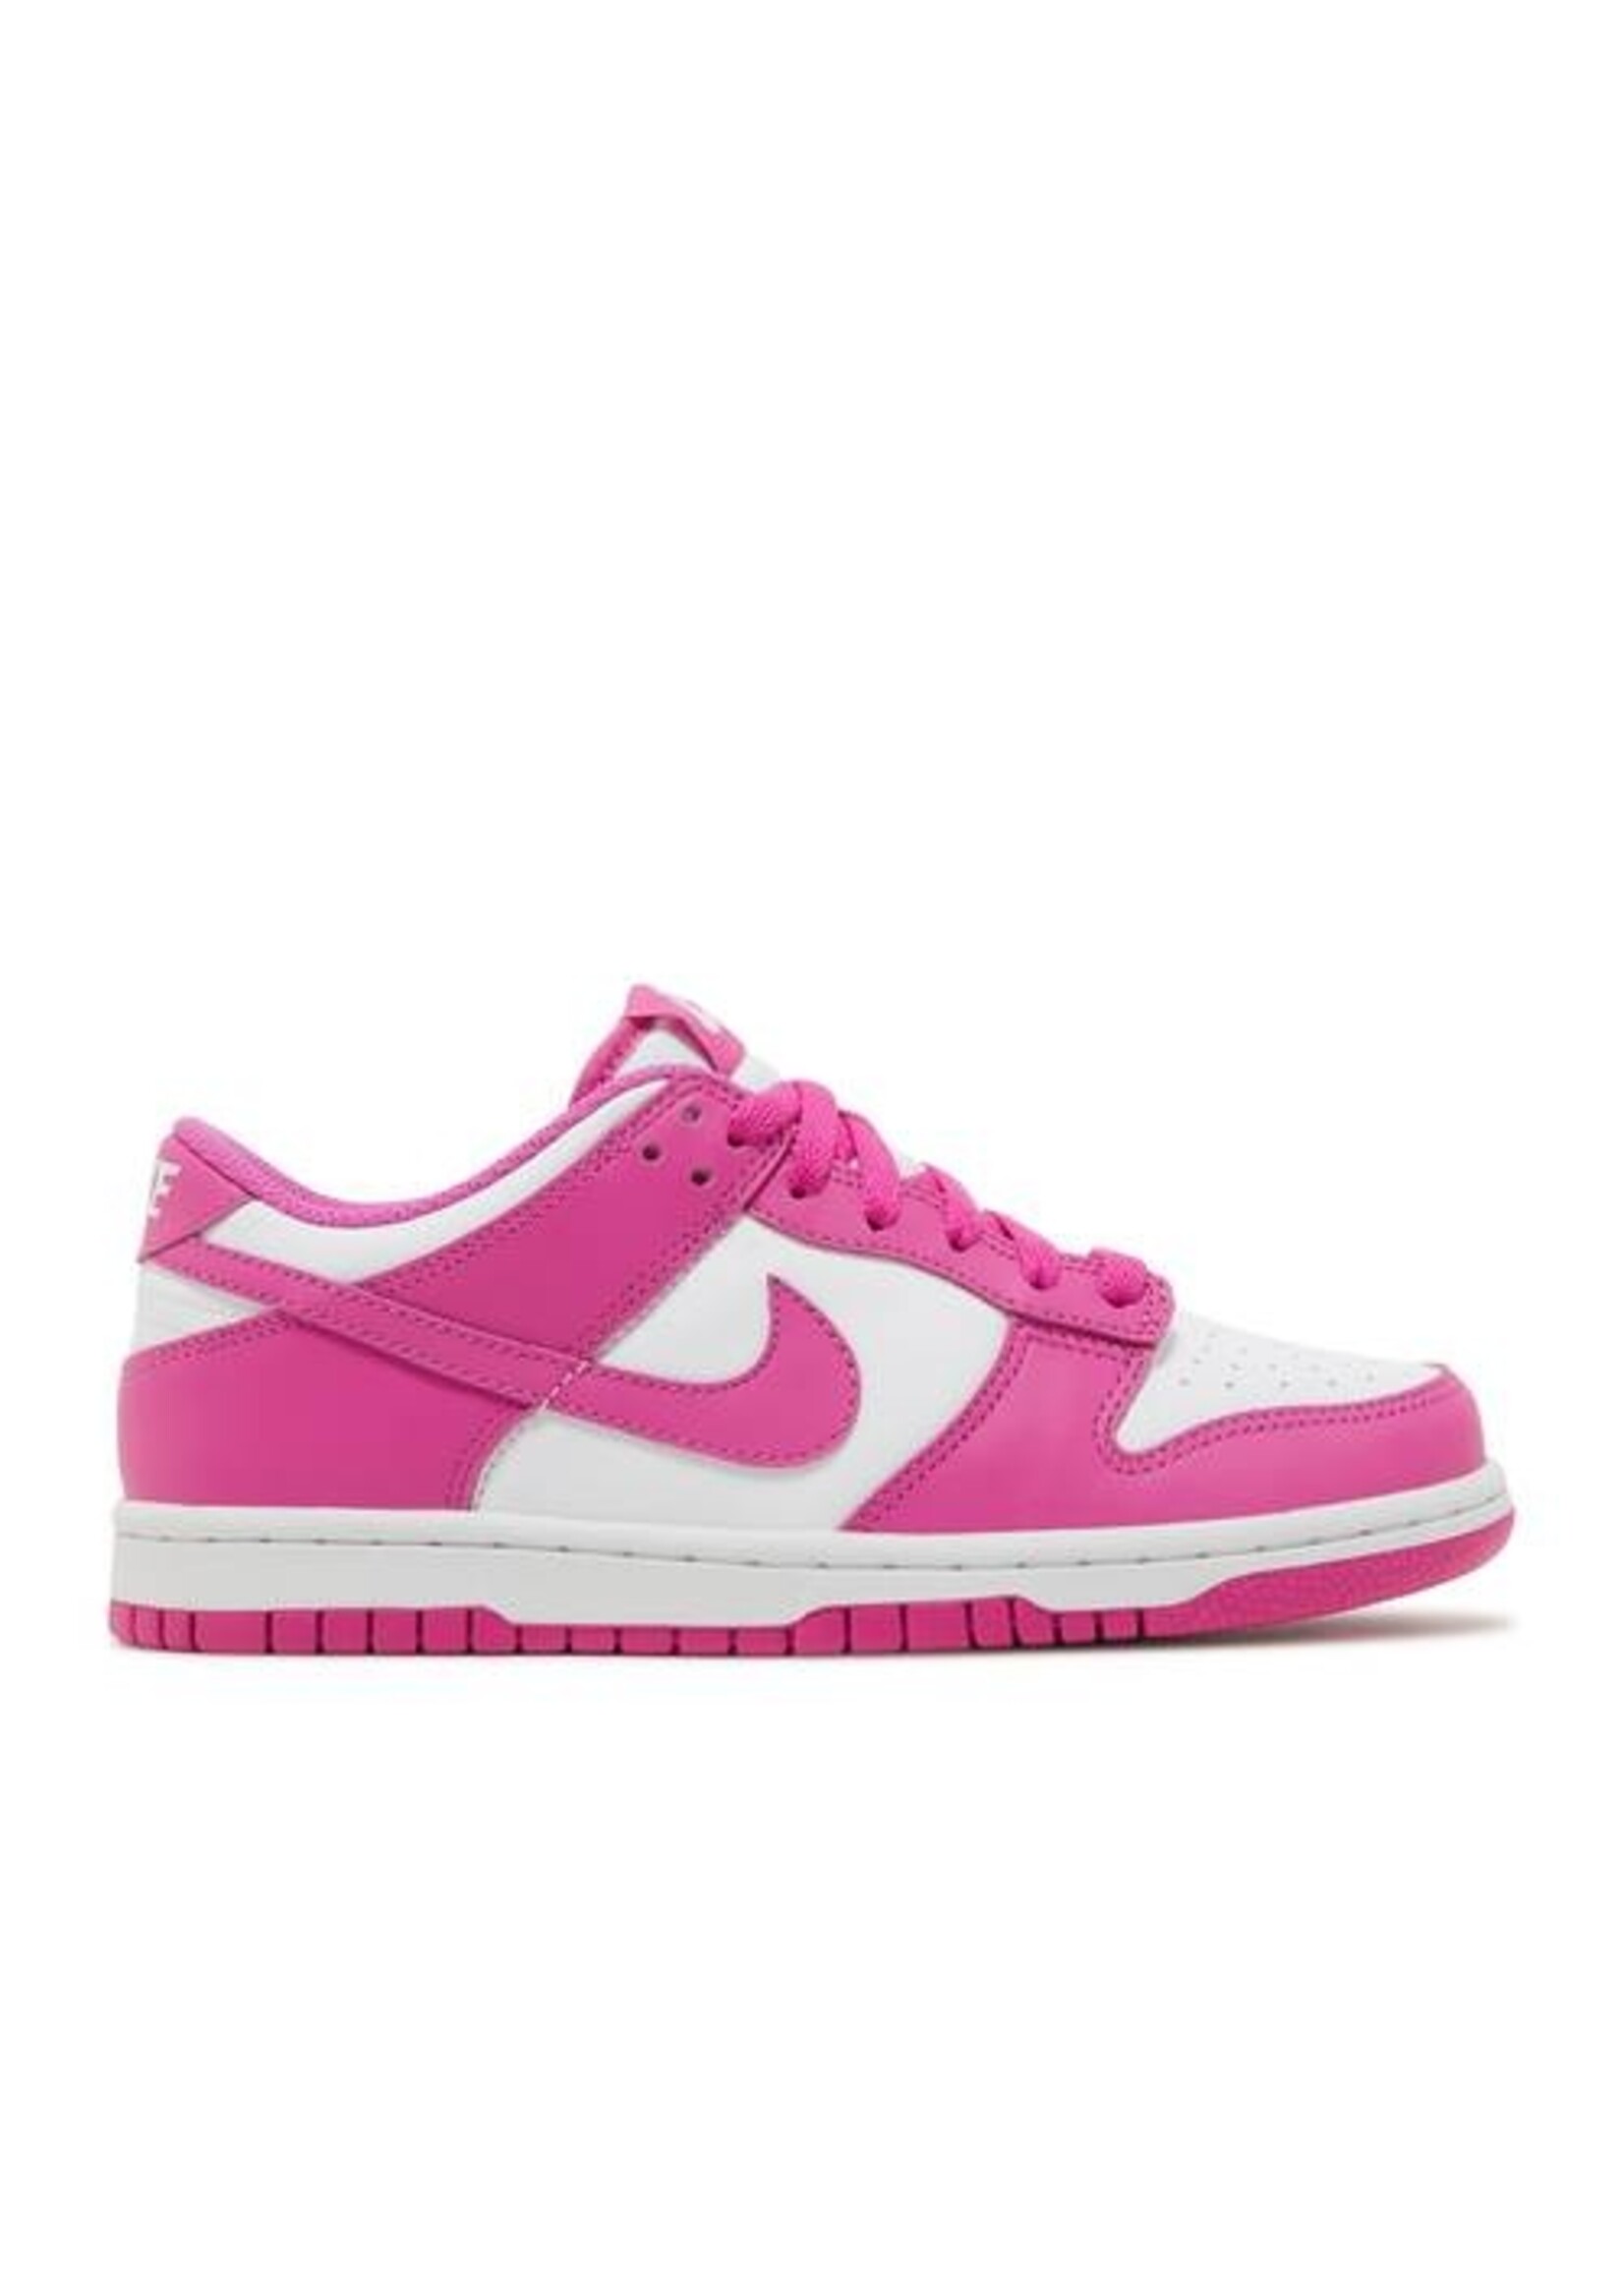 Nike Dunk Low Archeo Pink (PS) - Sole and Laces